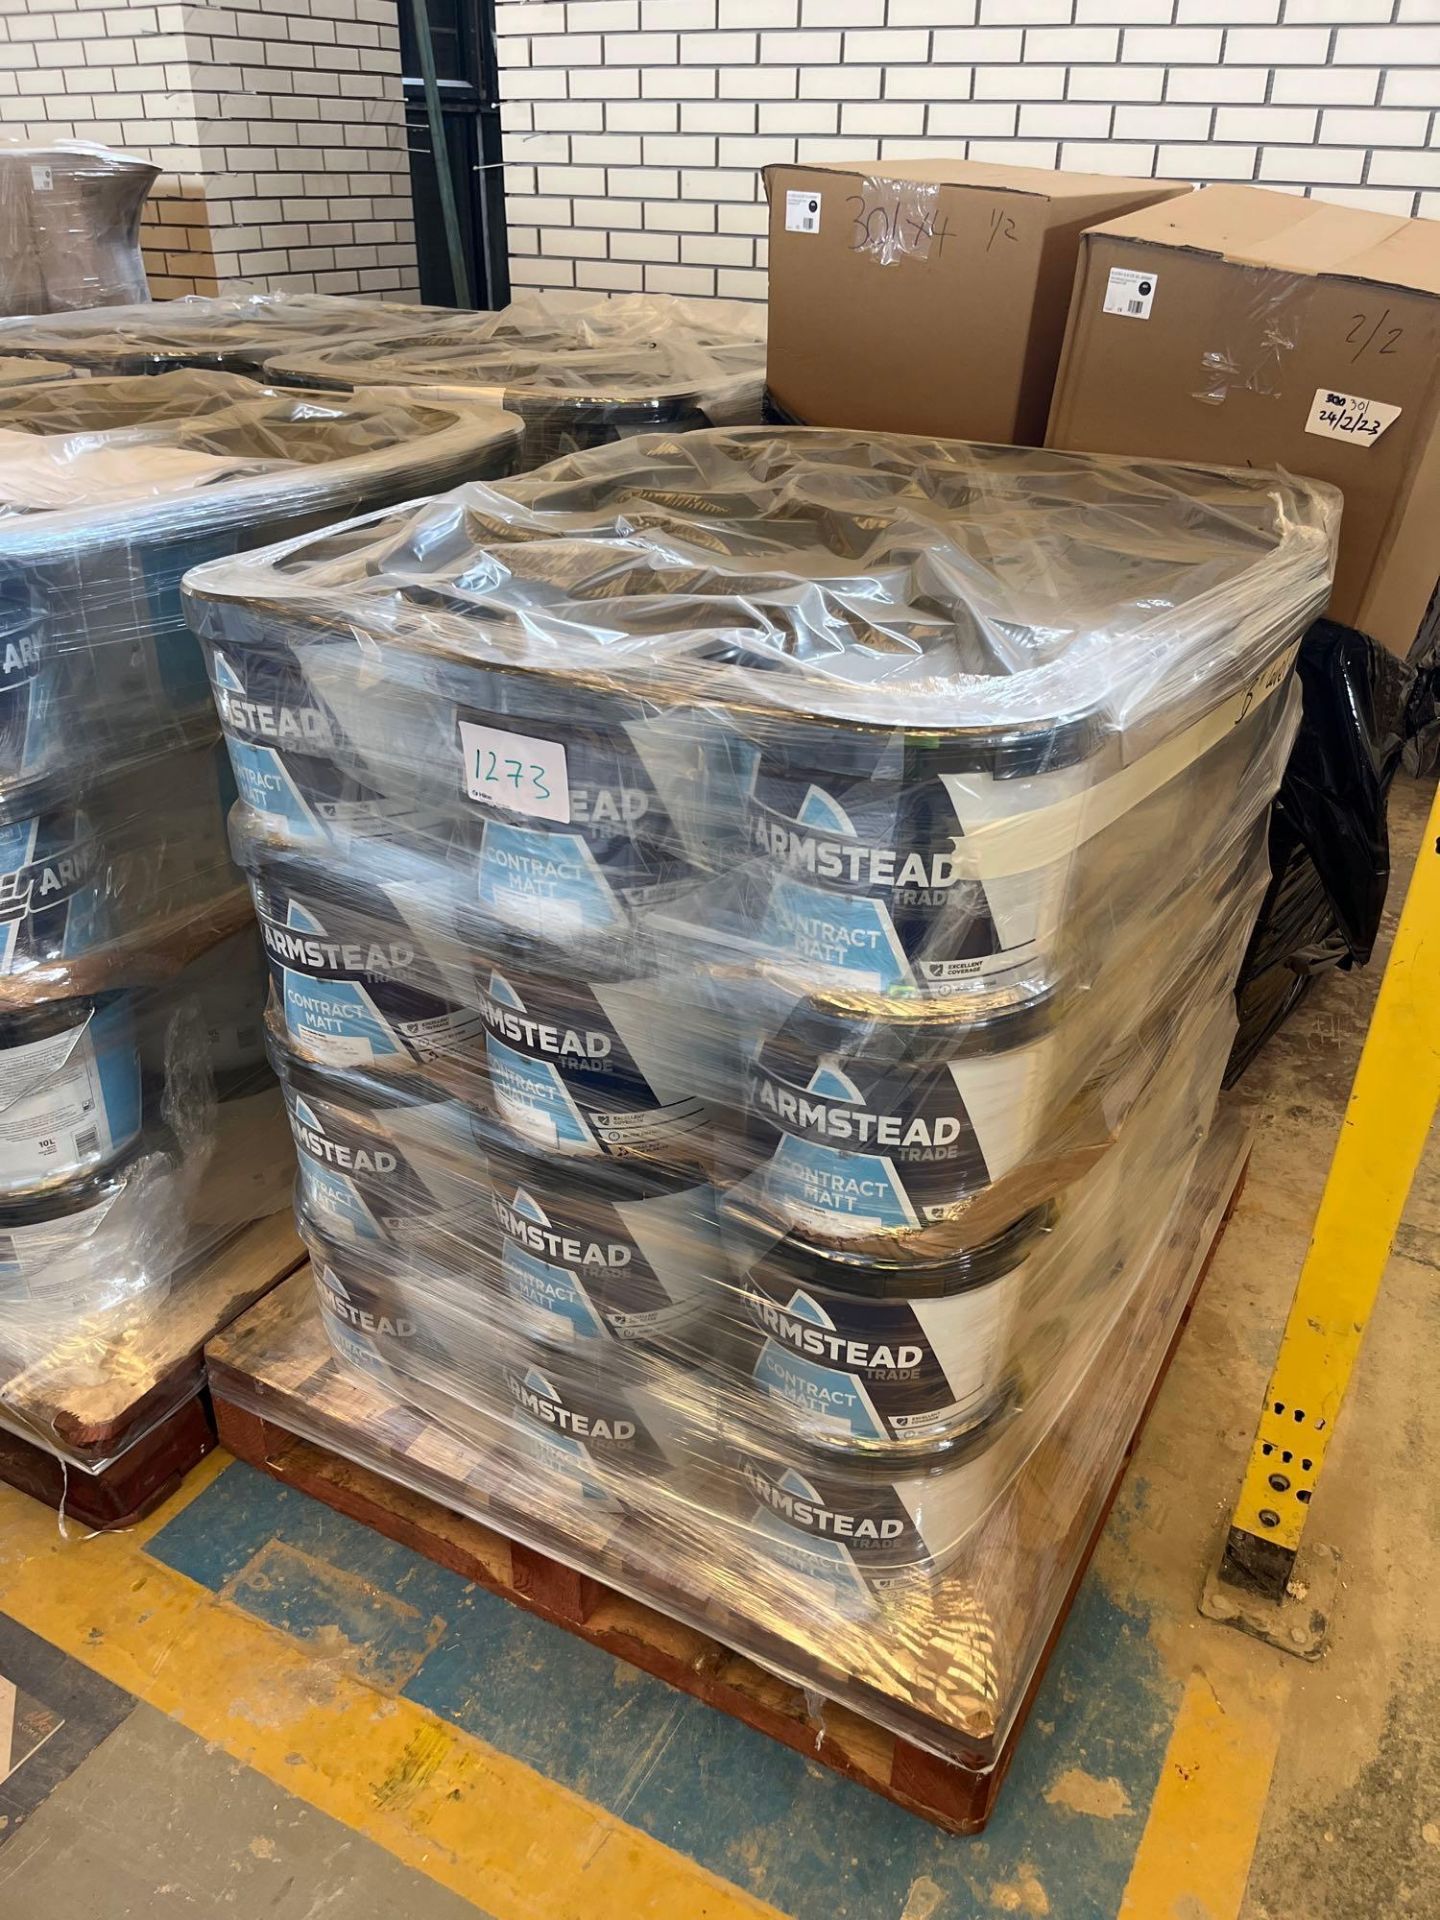 6 Pallets of 48 10L Tubs of Armstead Contract Matt Emulsion